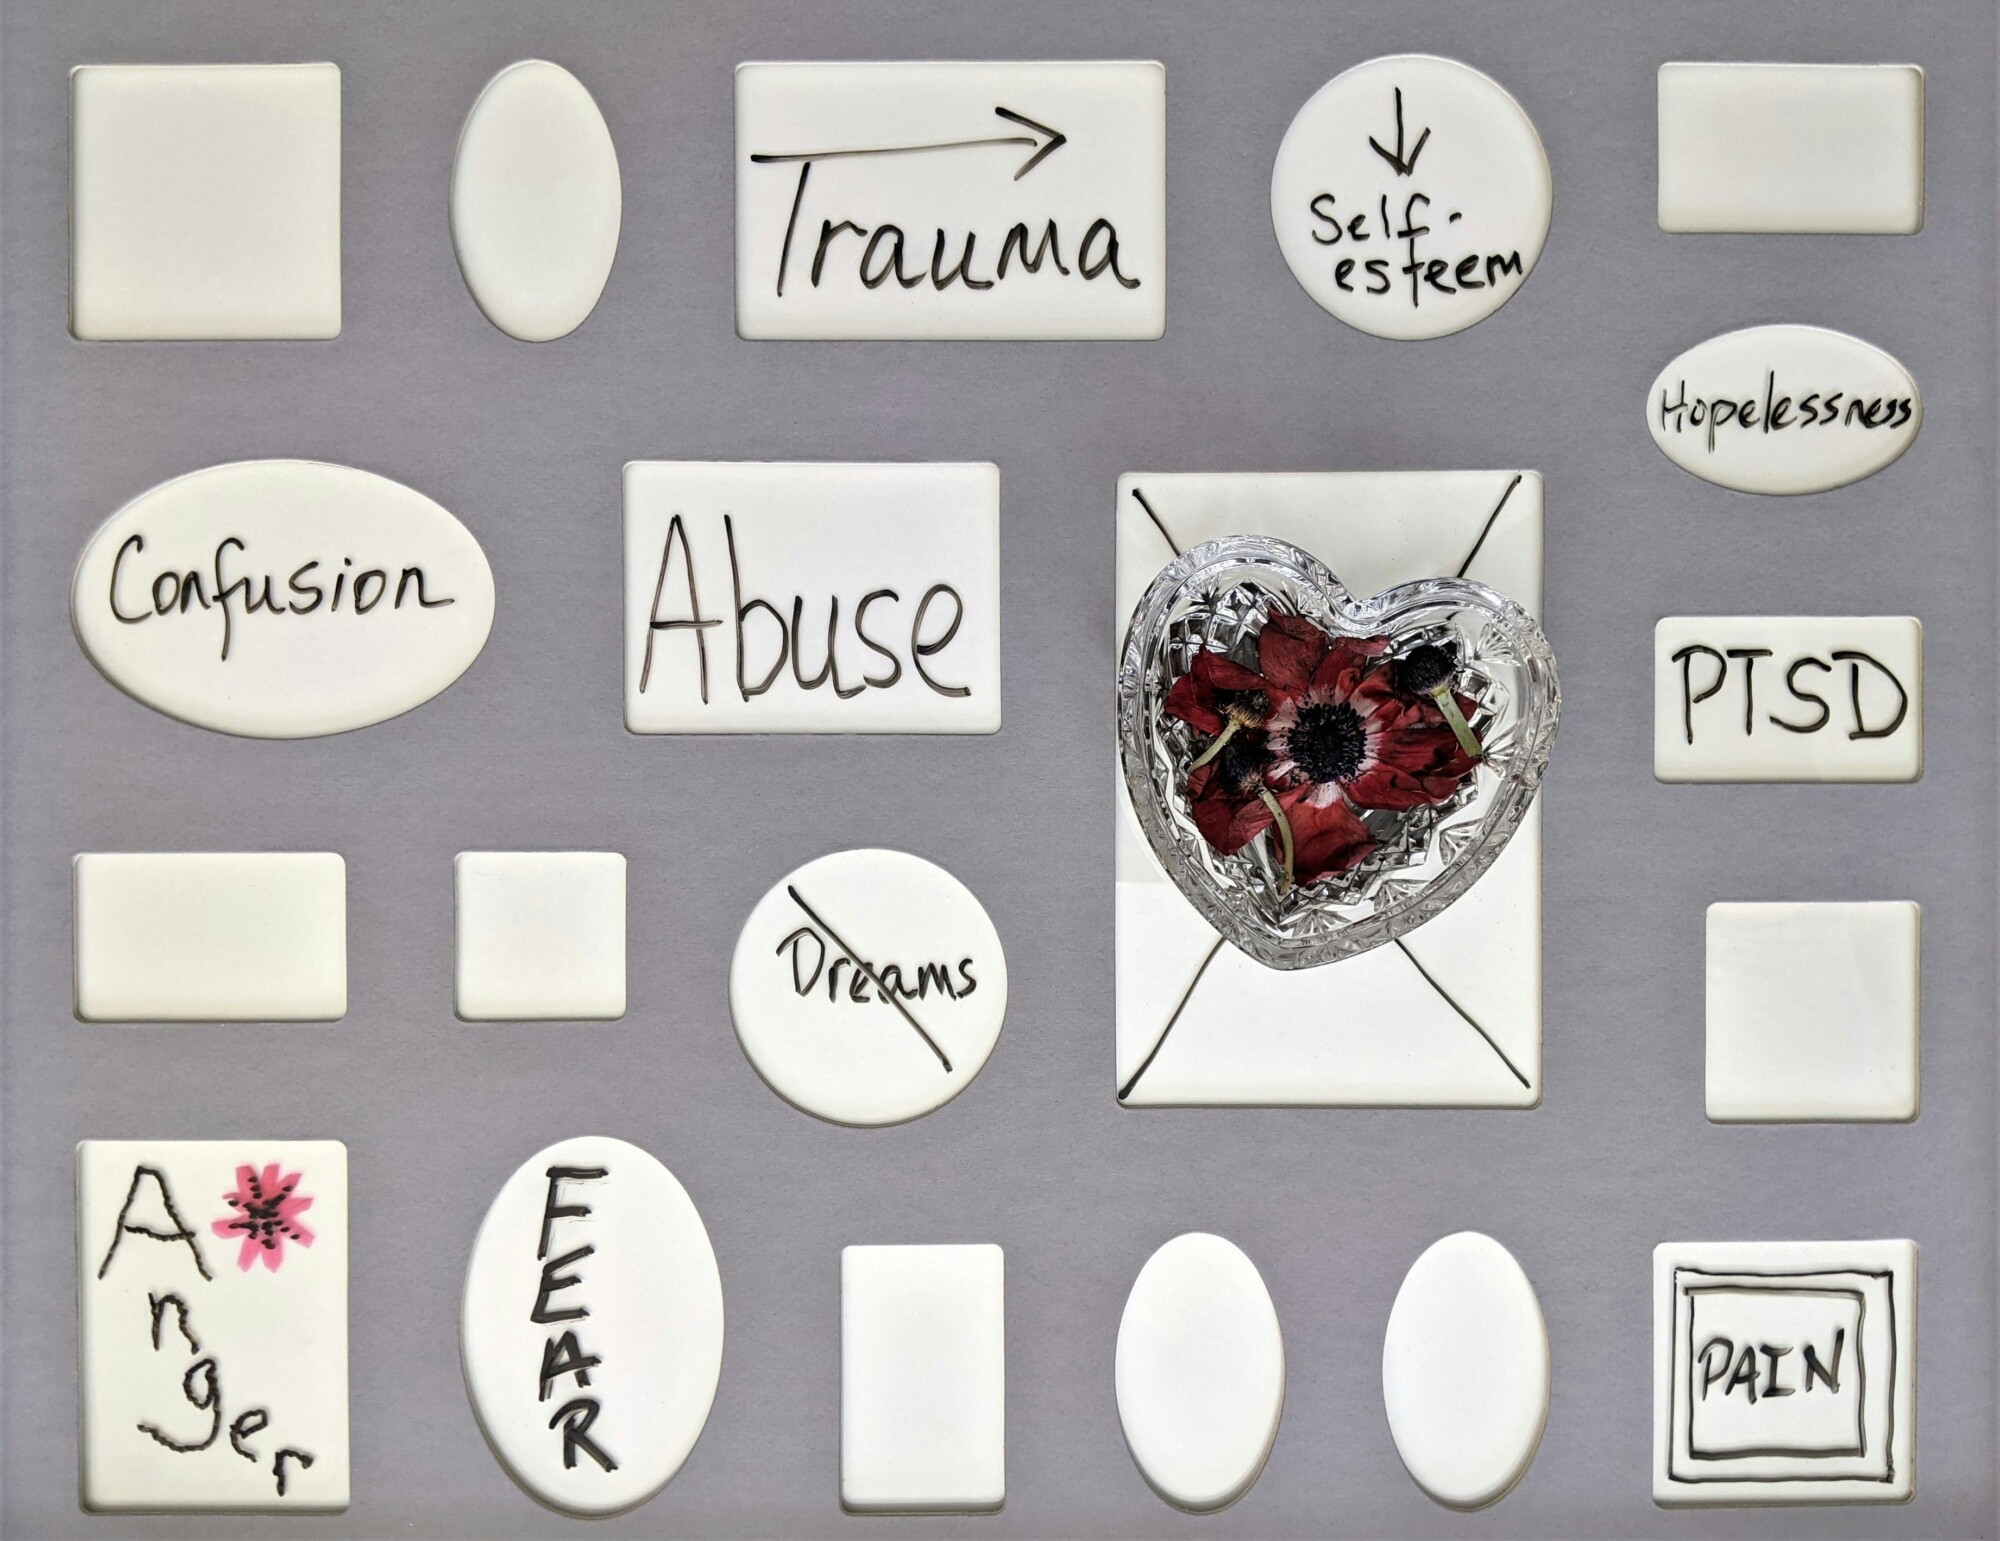 shapes with words "abuse" "trauma" "PTSD" "self-esteem" "anger" "pain" 'confusion"